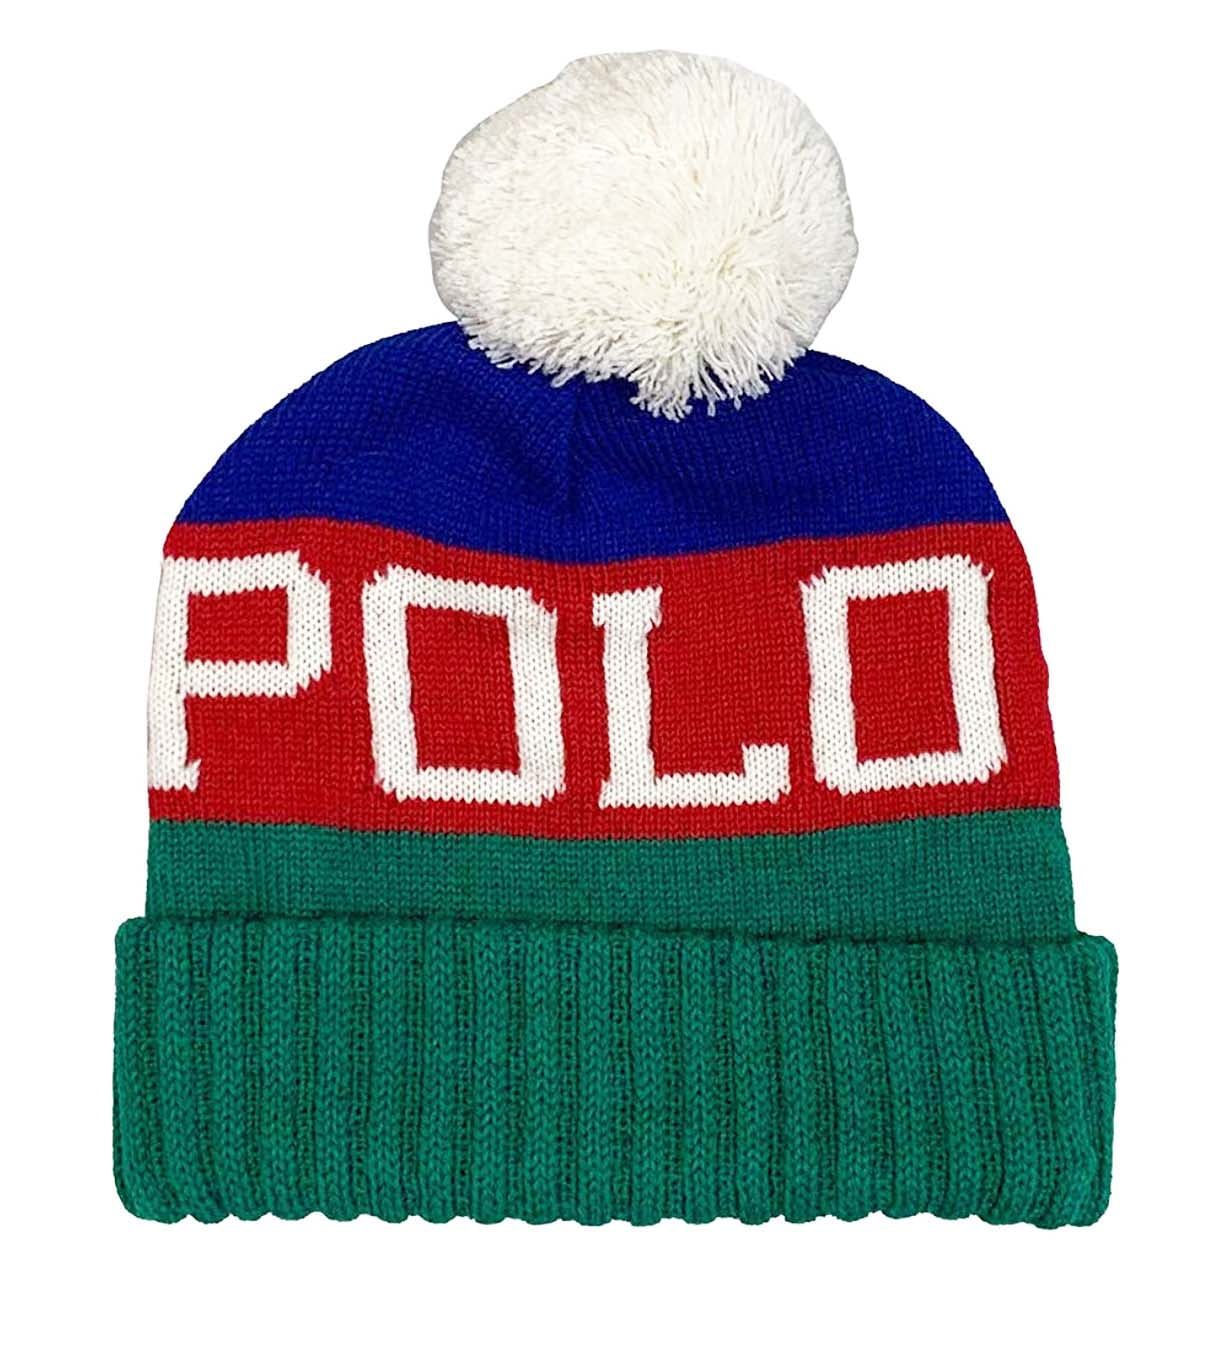 colorful polo hat